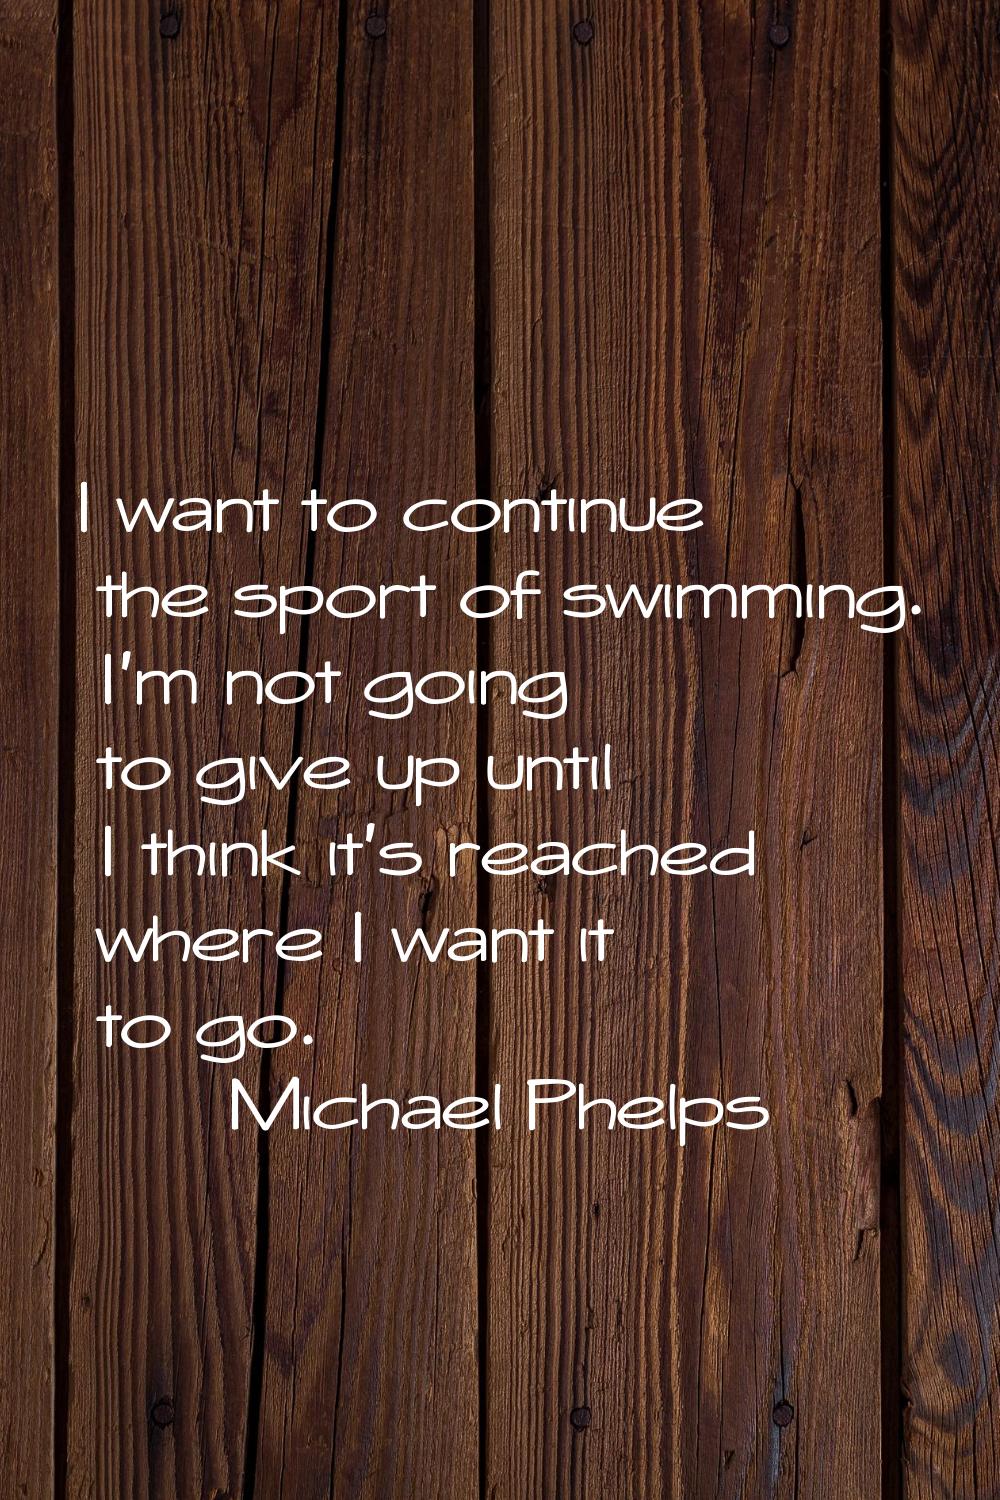 I want to continue the sport of swimming. I'm not going to give up until I think it's reached where